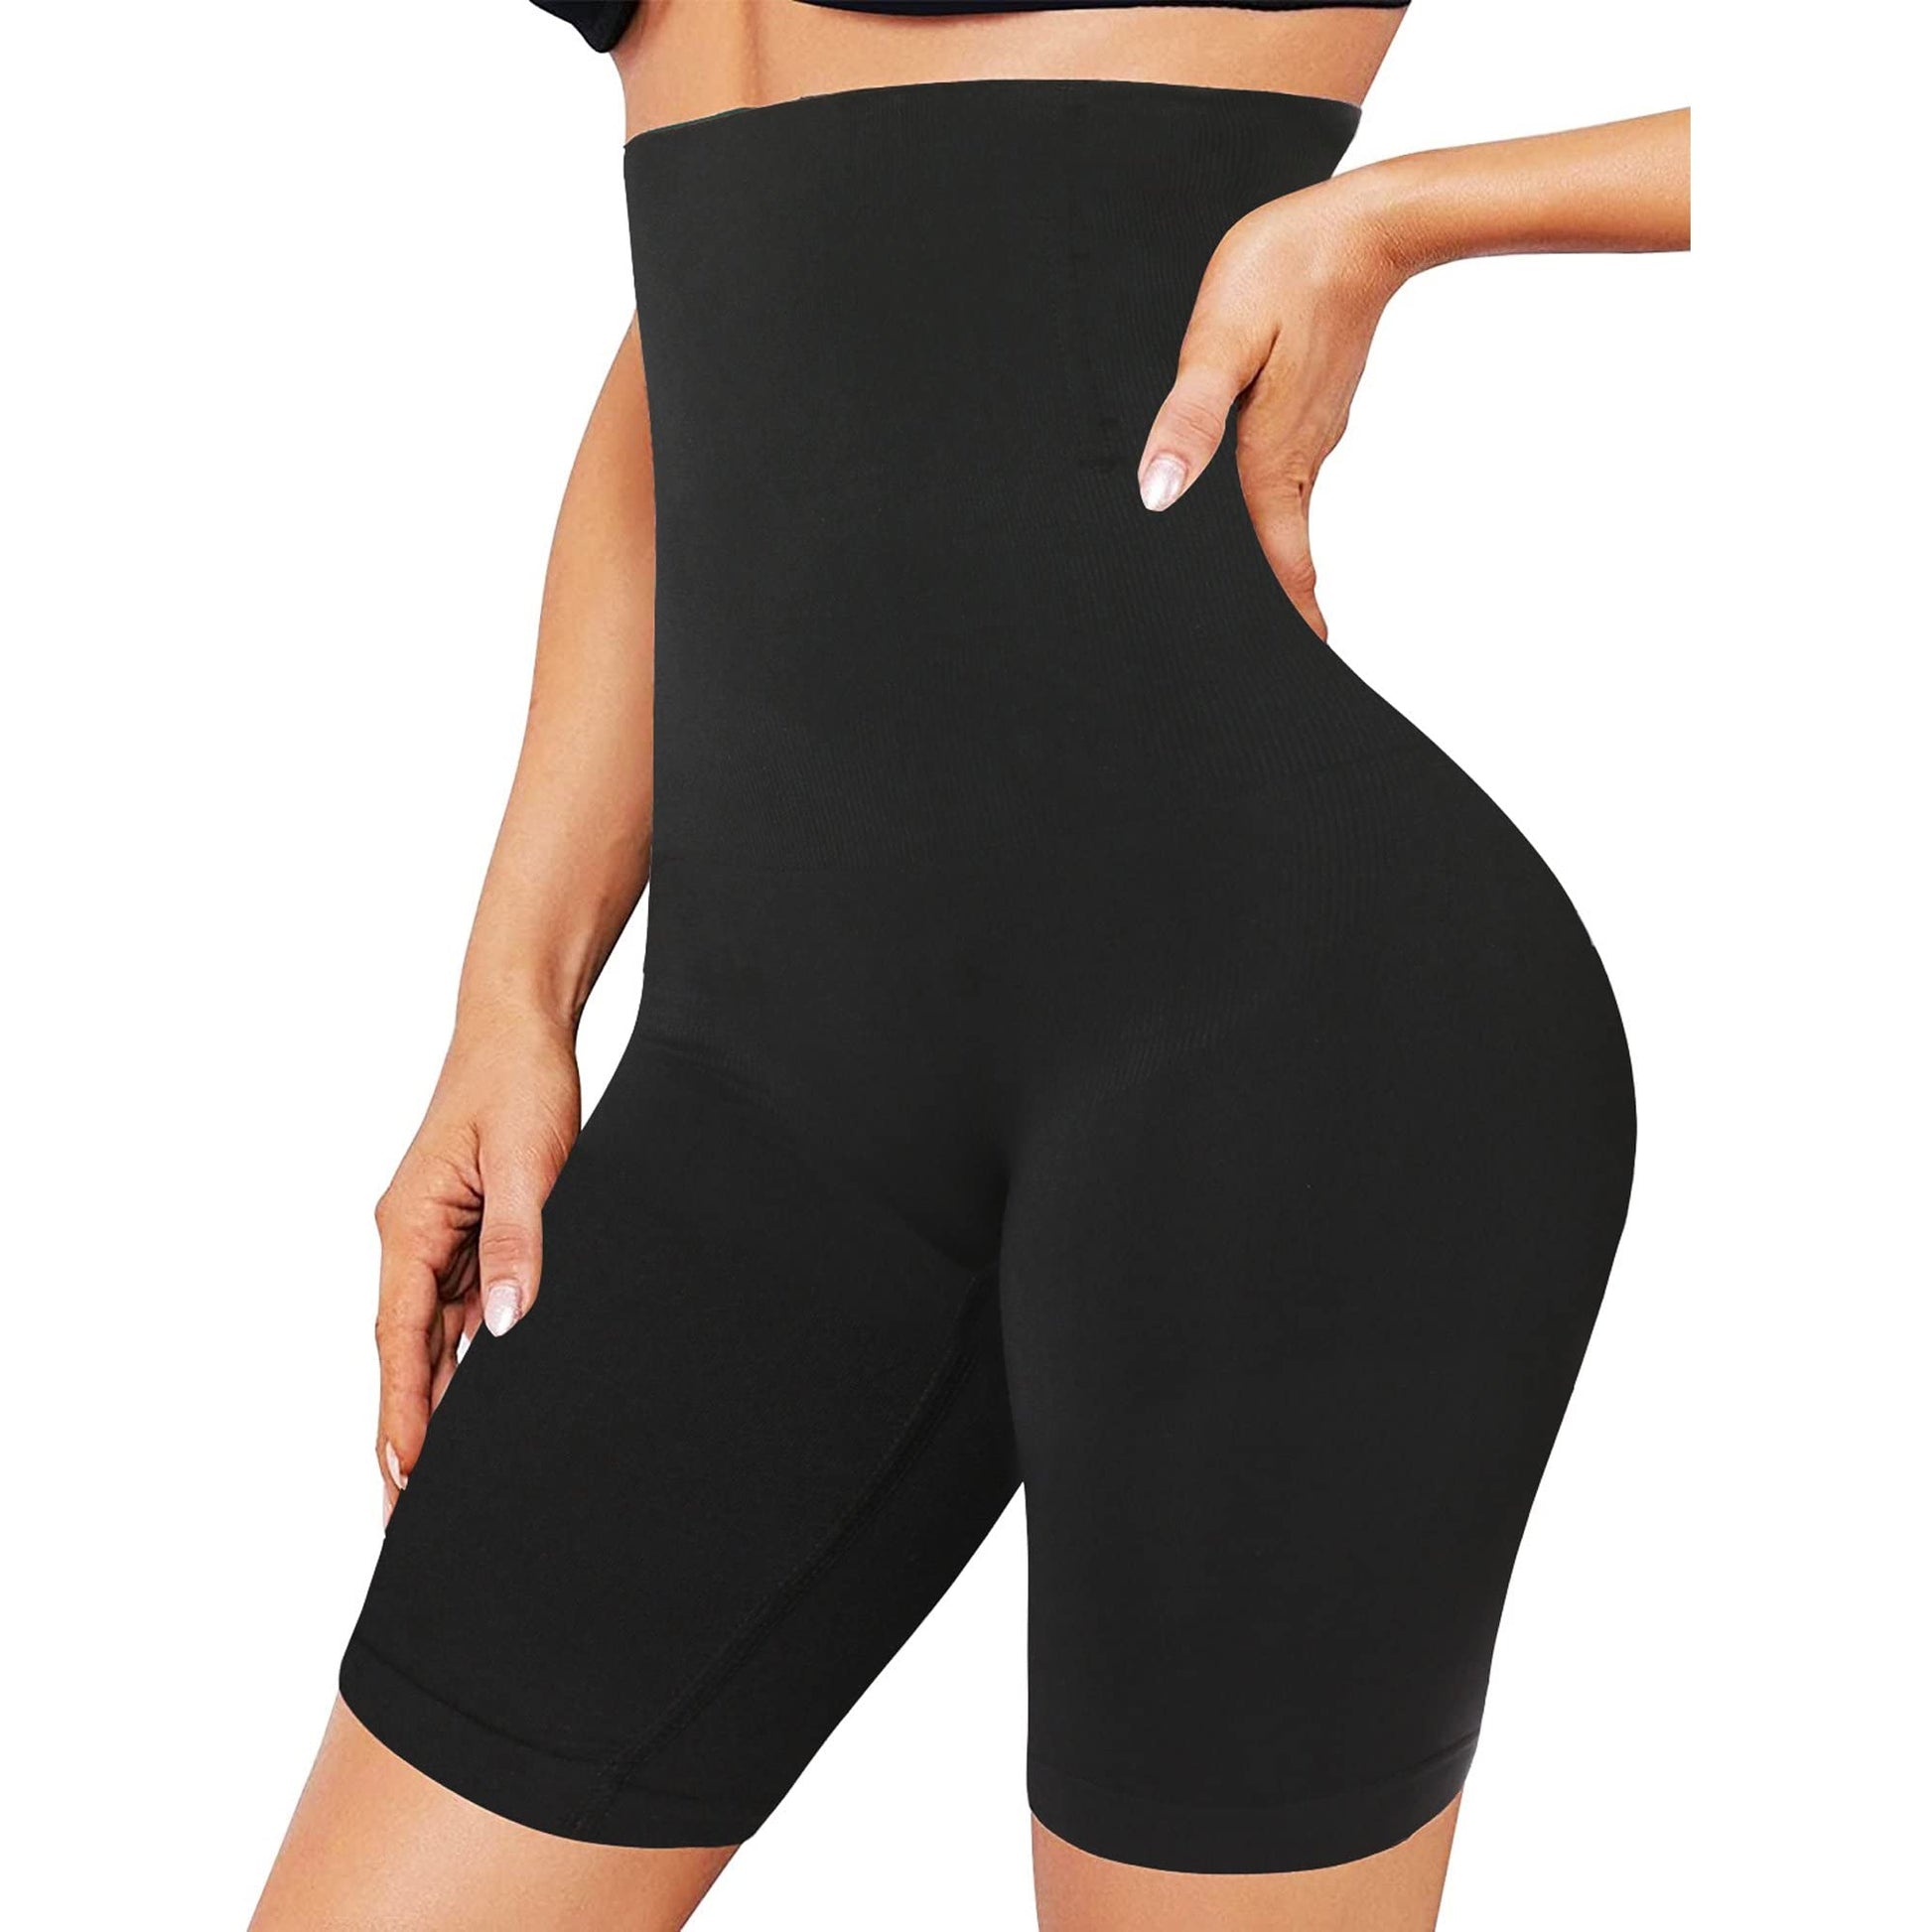 Find Cheap, Fashionable and Slimming shapewear in india 